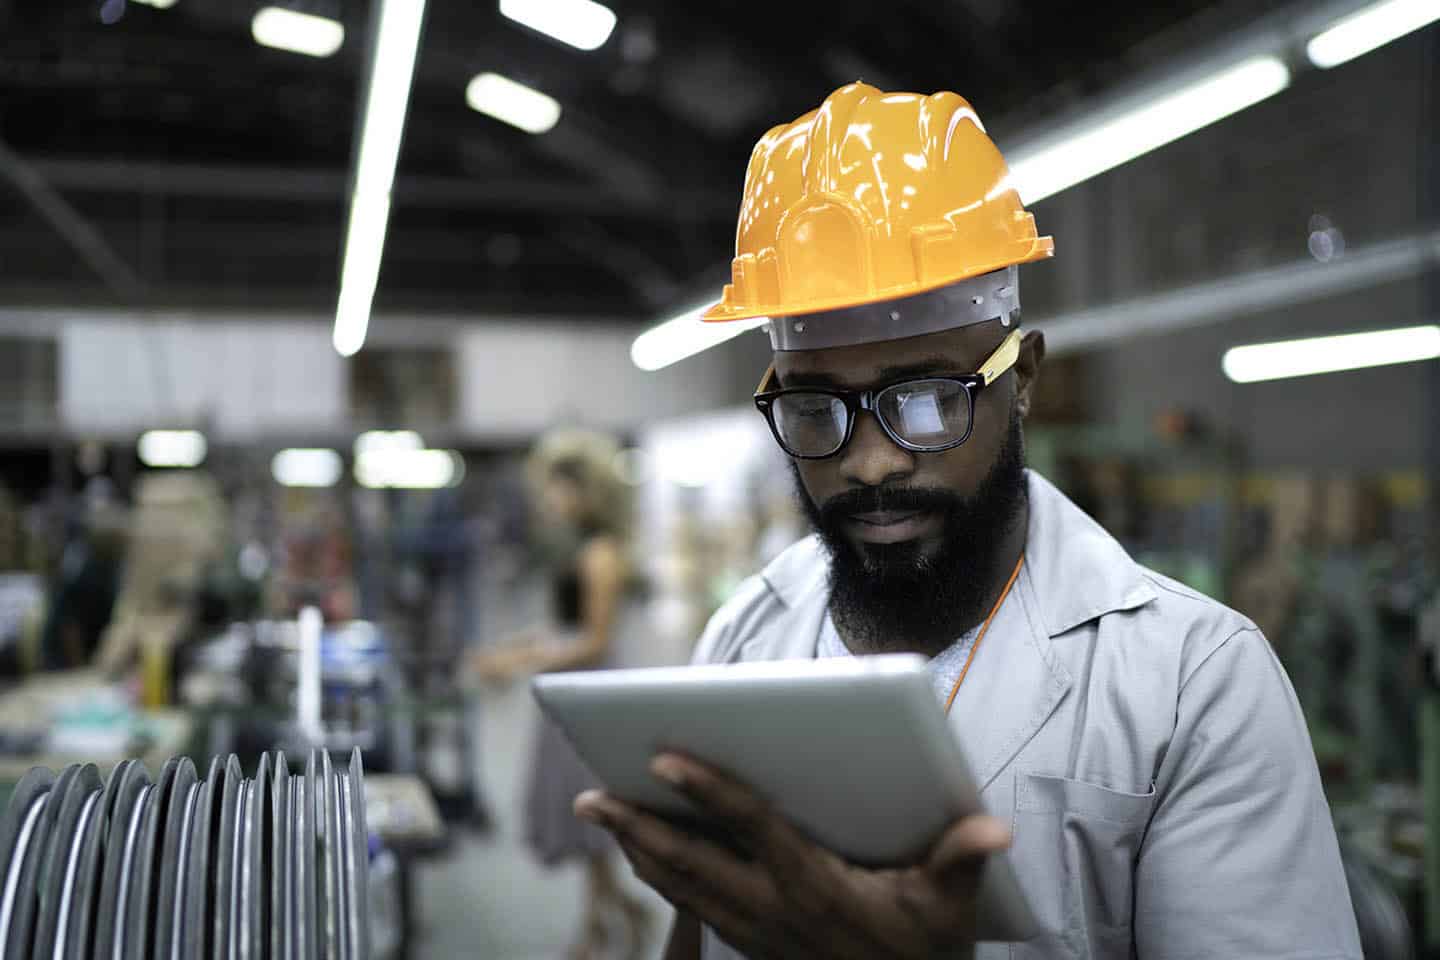 Engineer using tablet and working in factory